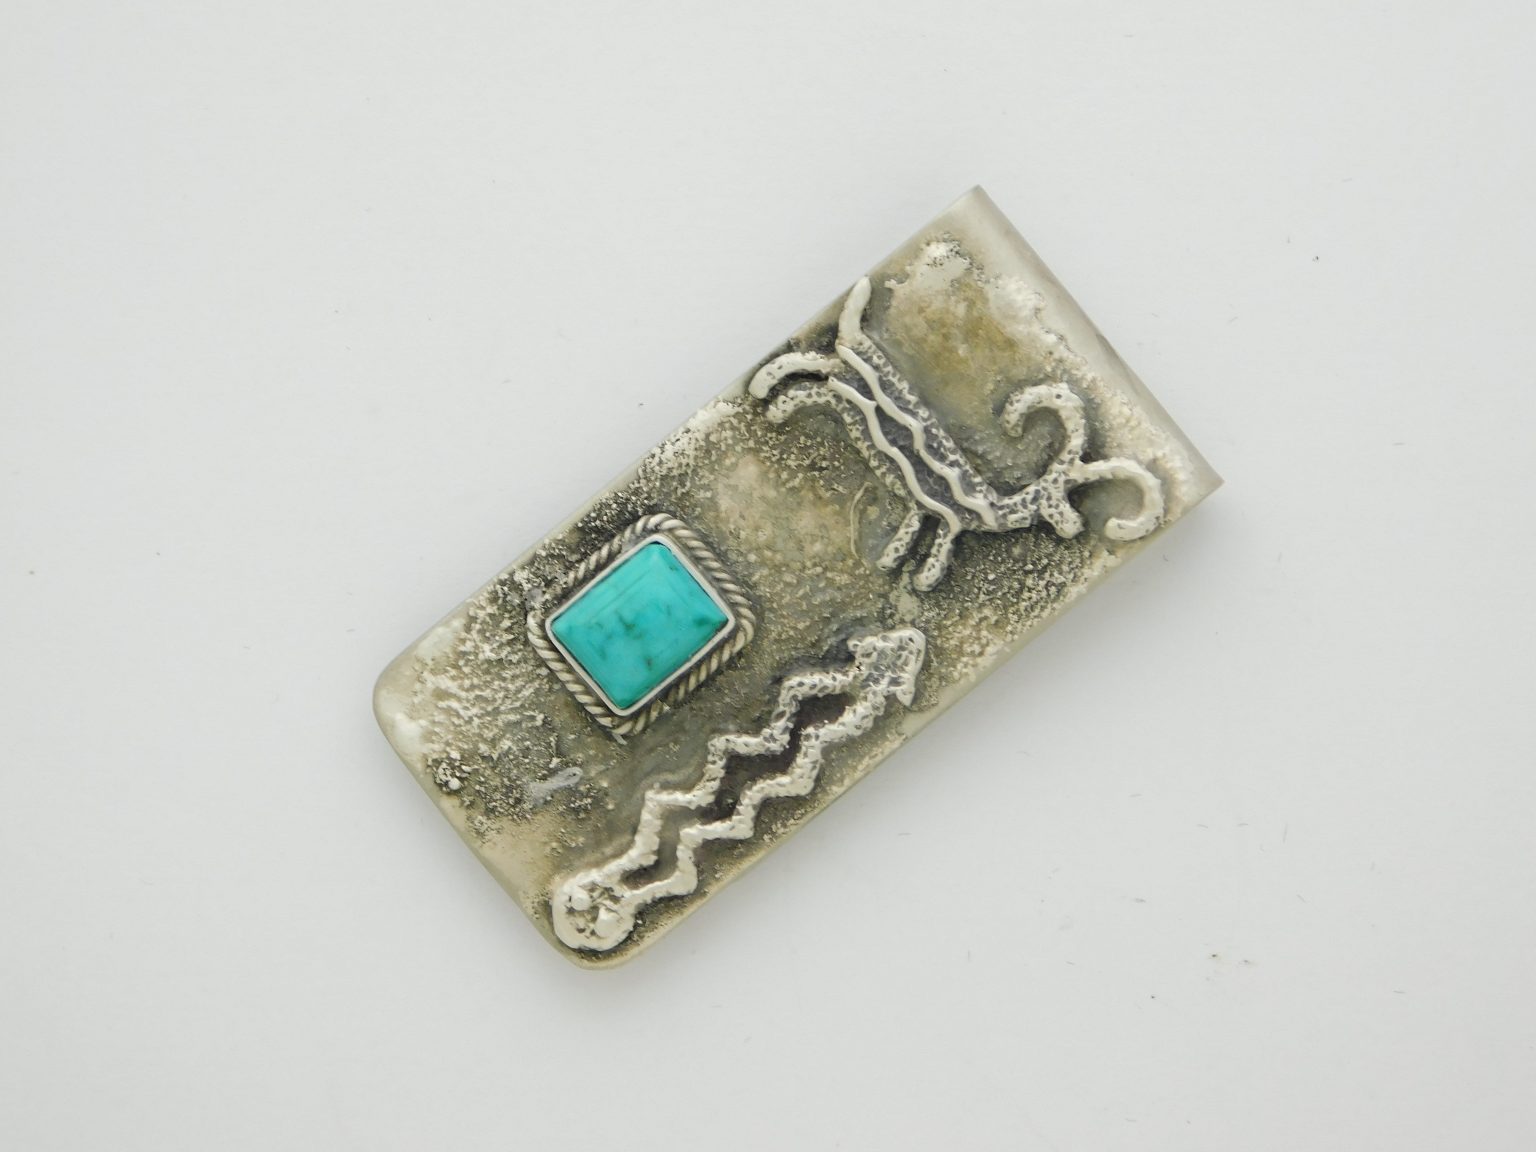 TONY CHINO Acoma Pueblo Antelope and Snake Sterling Silver and Turquoise Money Clip